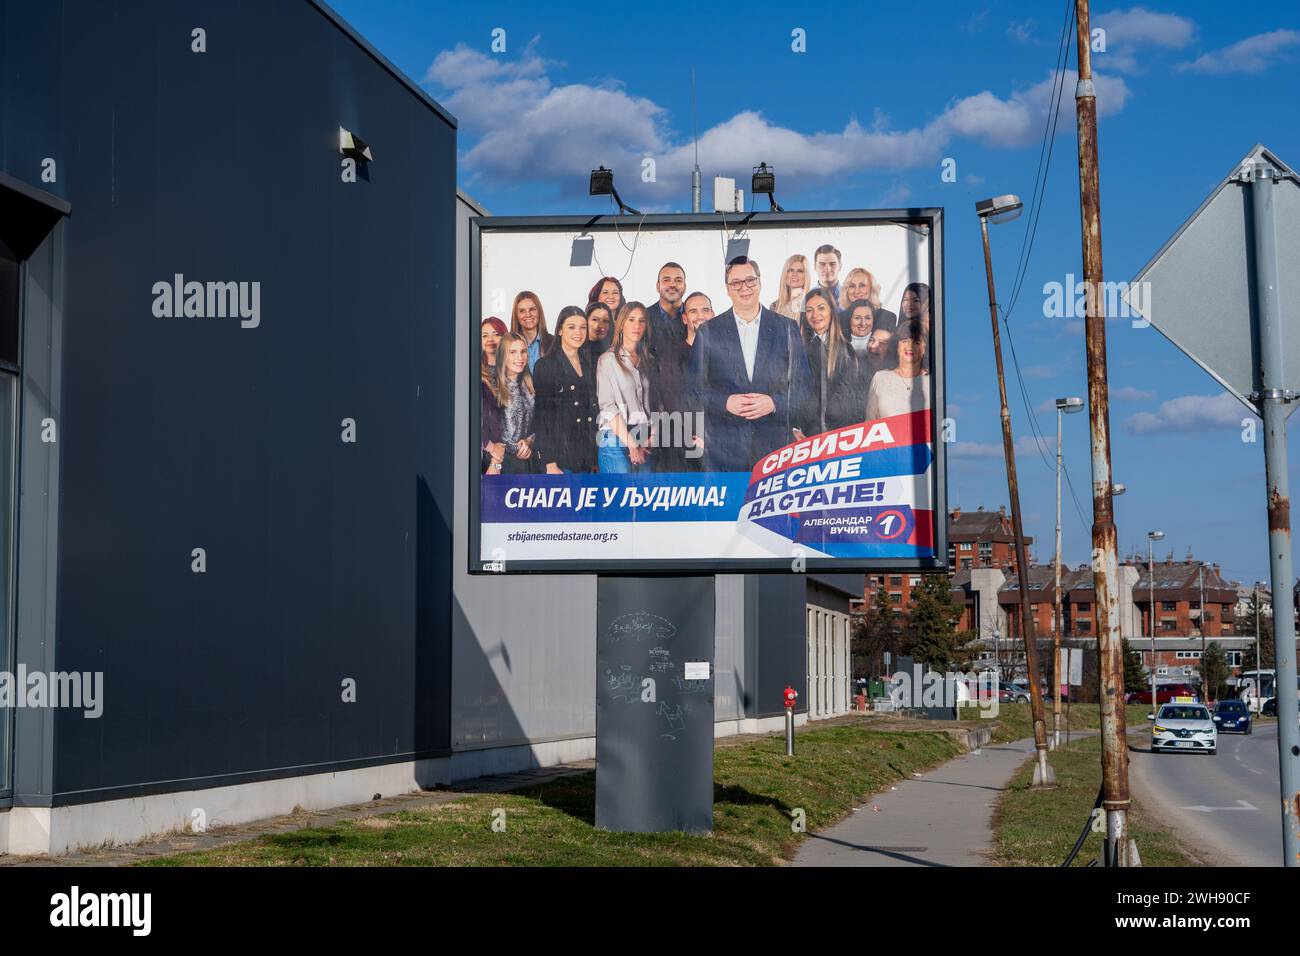 'Serbia must not stop' - Billboard in the political campaign of Aleksandar Vučić and the Serbian Progressive Party for the disputed parliamentary elec Stock Photo